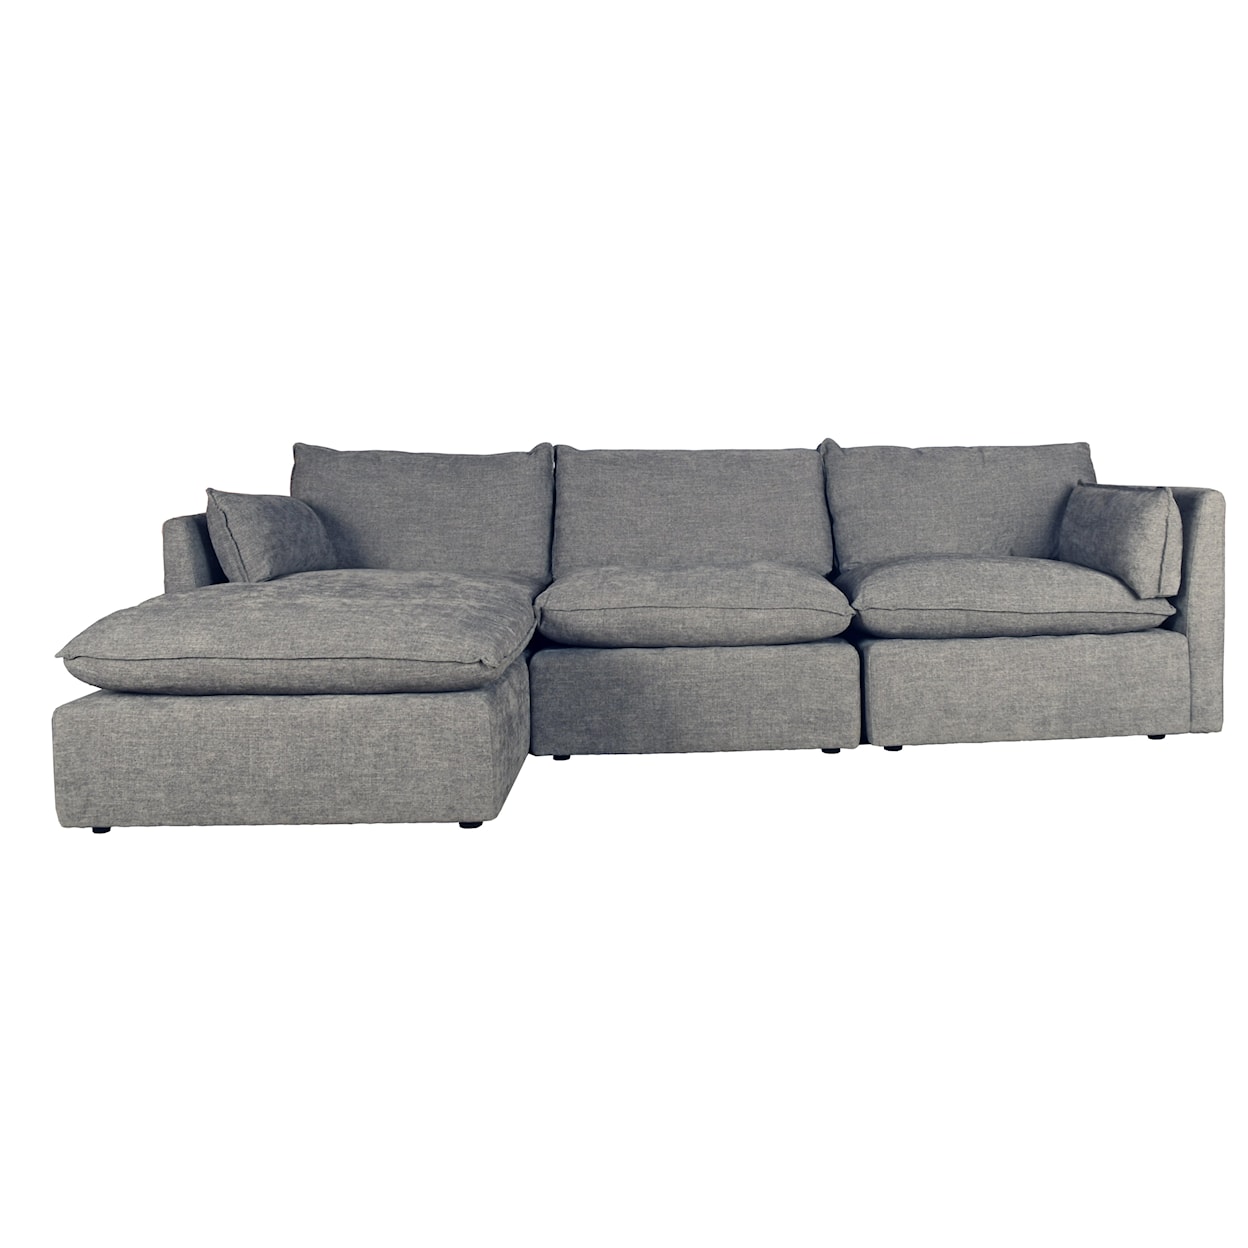 Maric Furniture Milo 3 Pc. Sectional